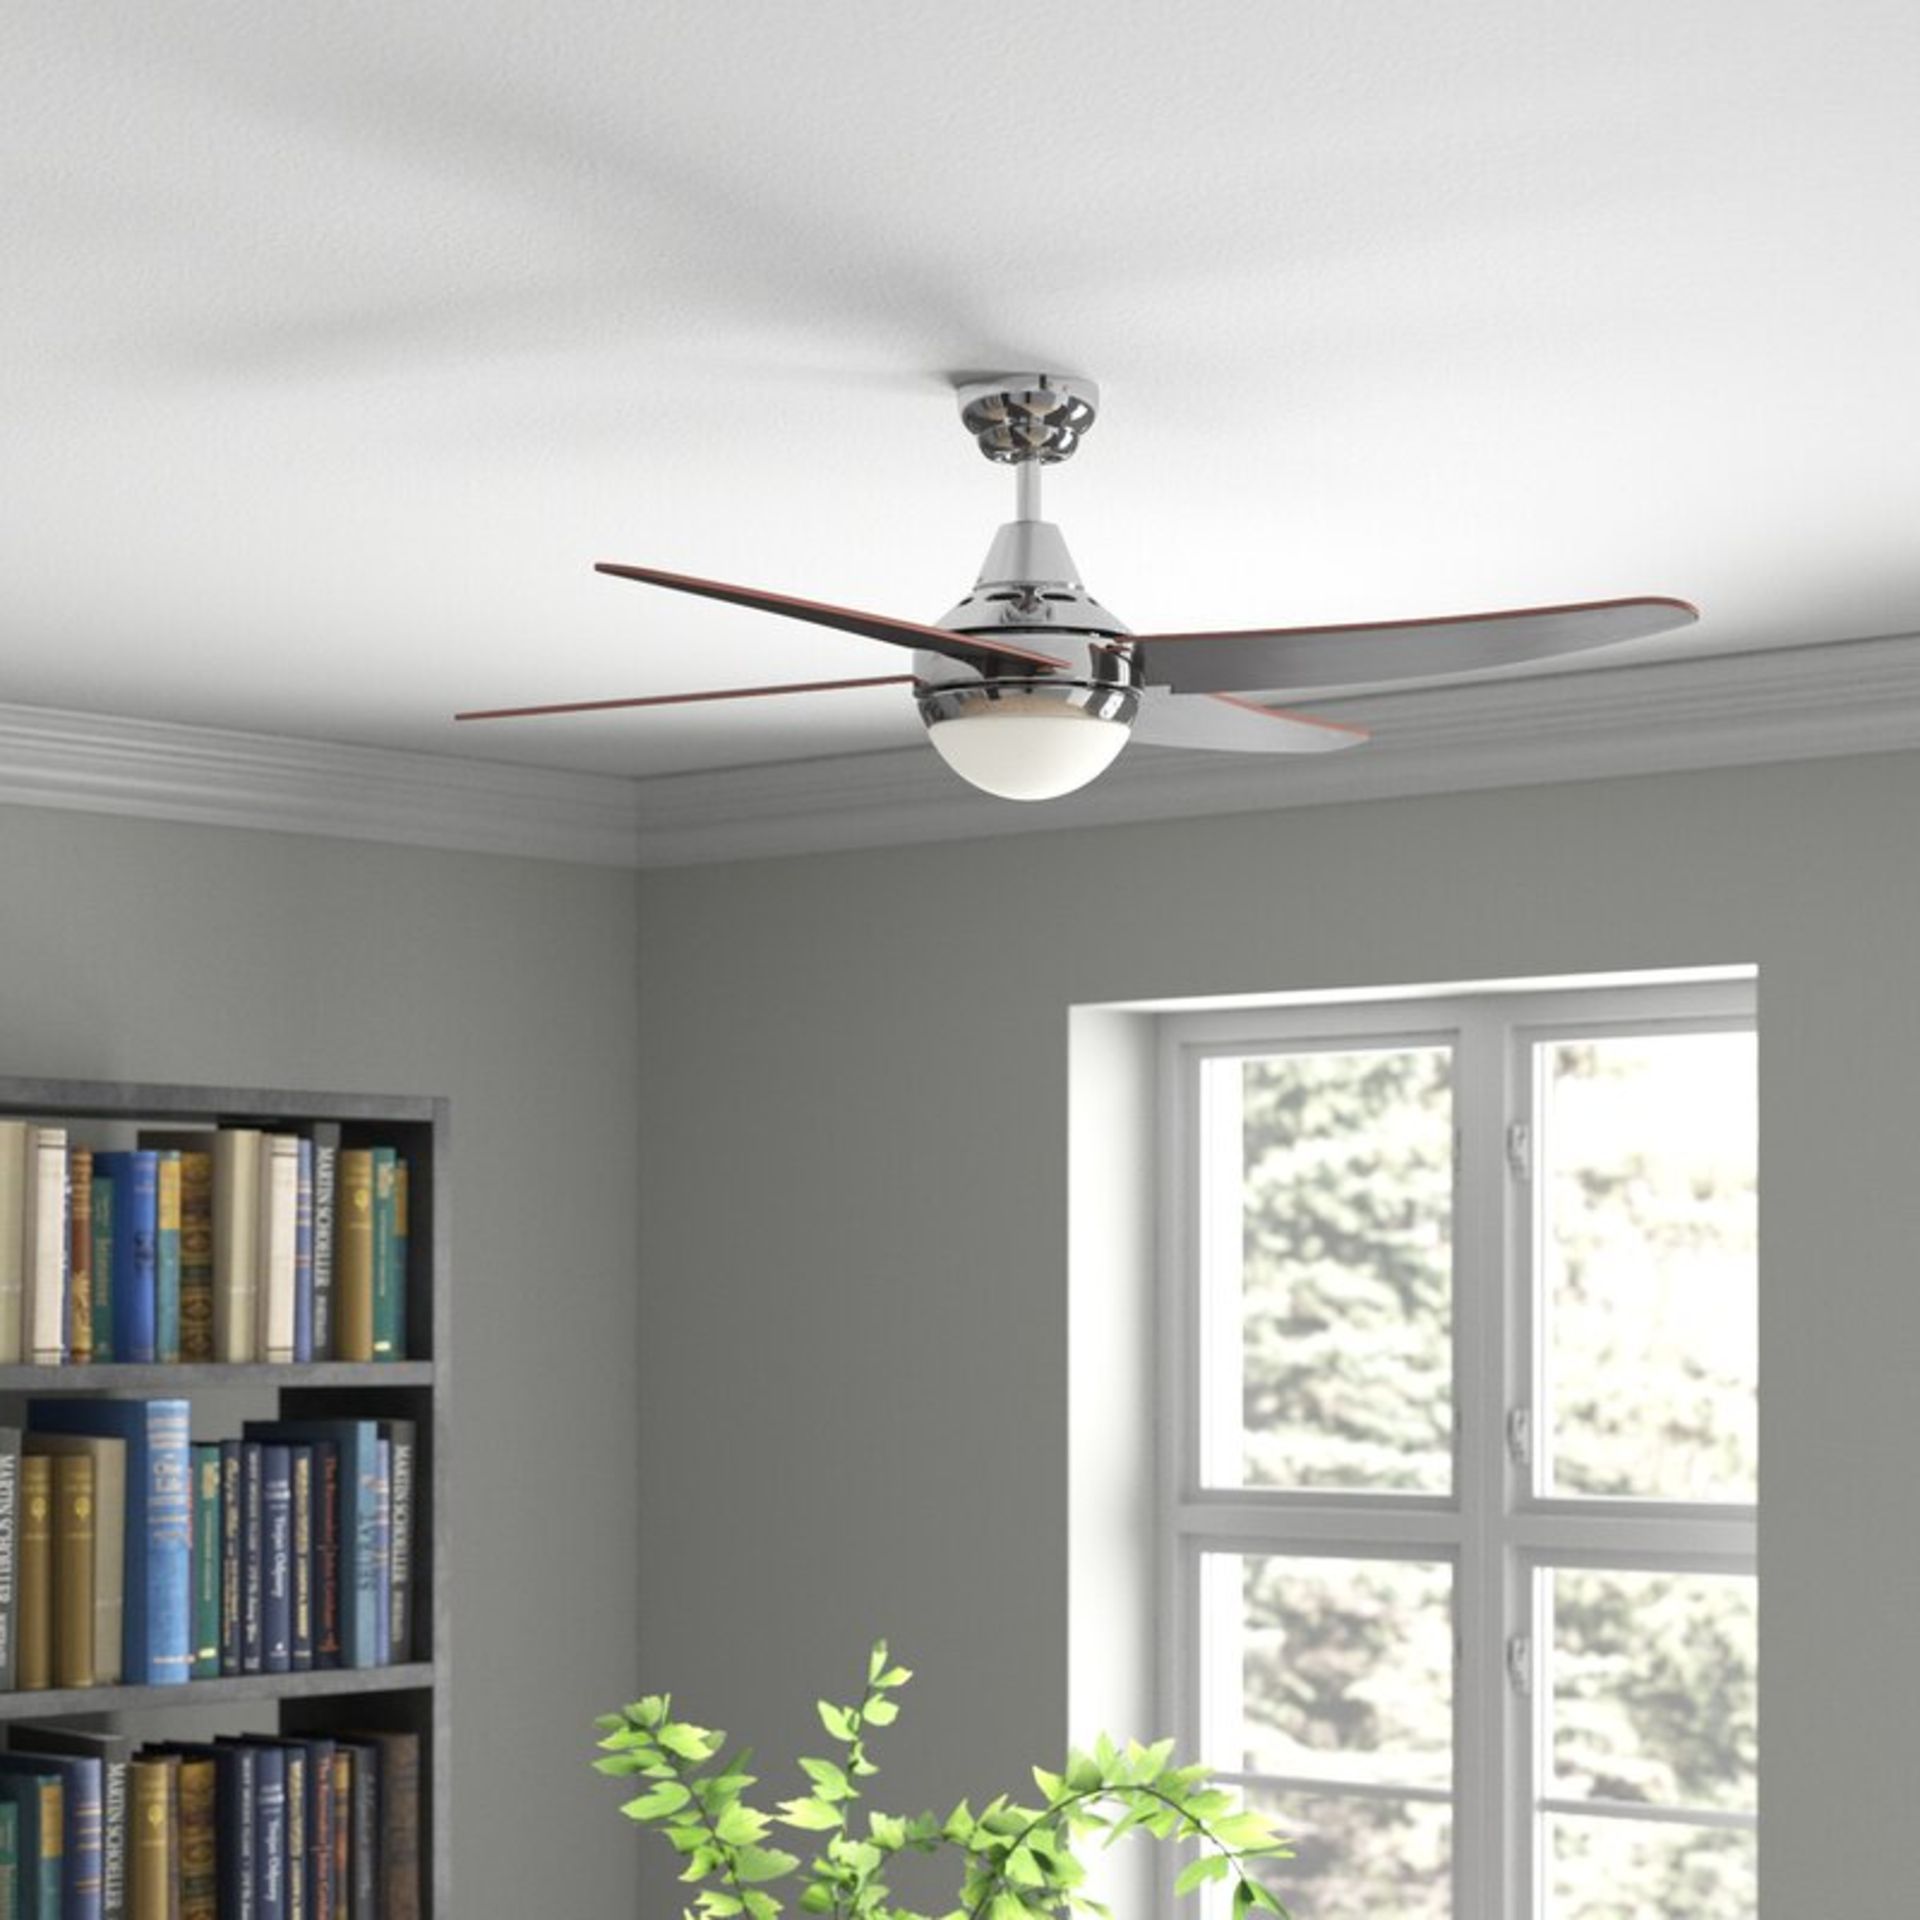 122cm Calista 4 Blade LED Ceiling Fan with Remote - RRP £99.99